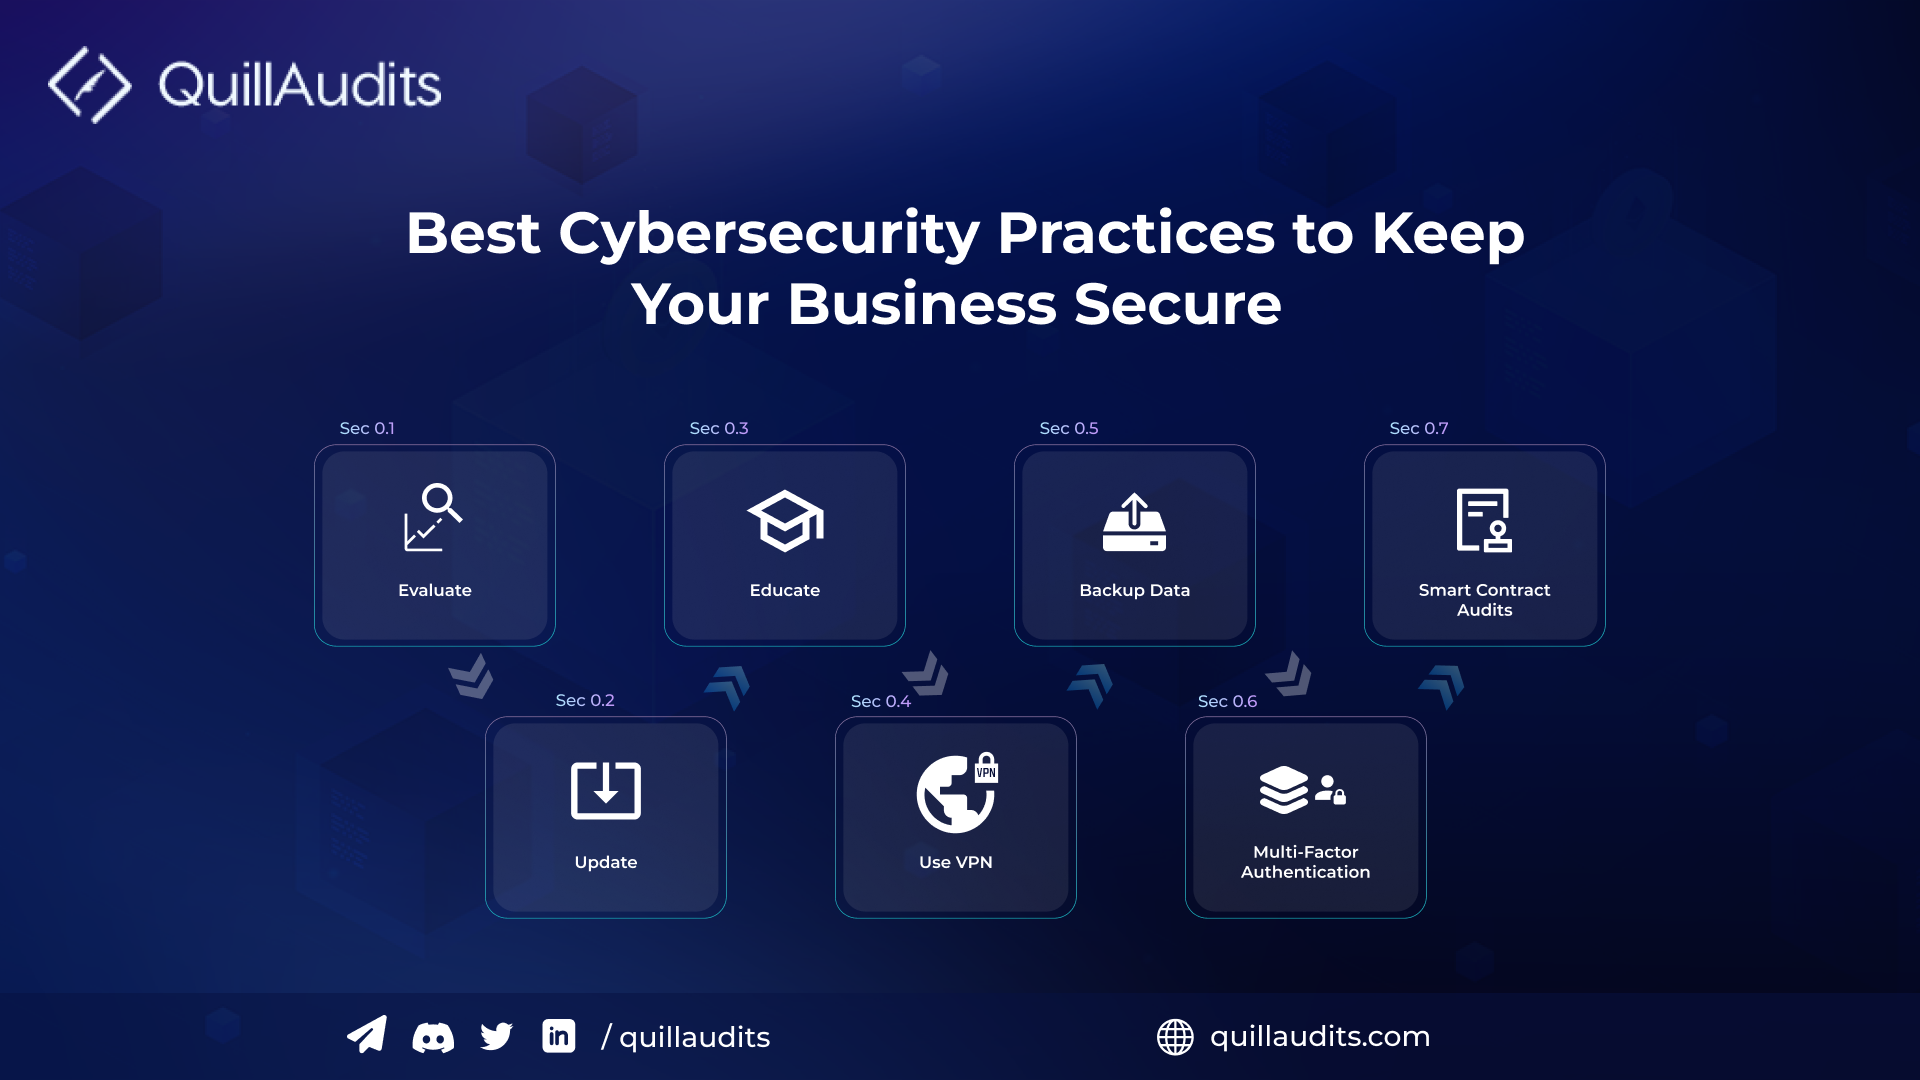 Best Cybersecurity Practices for Your Business